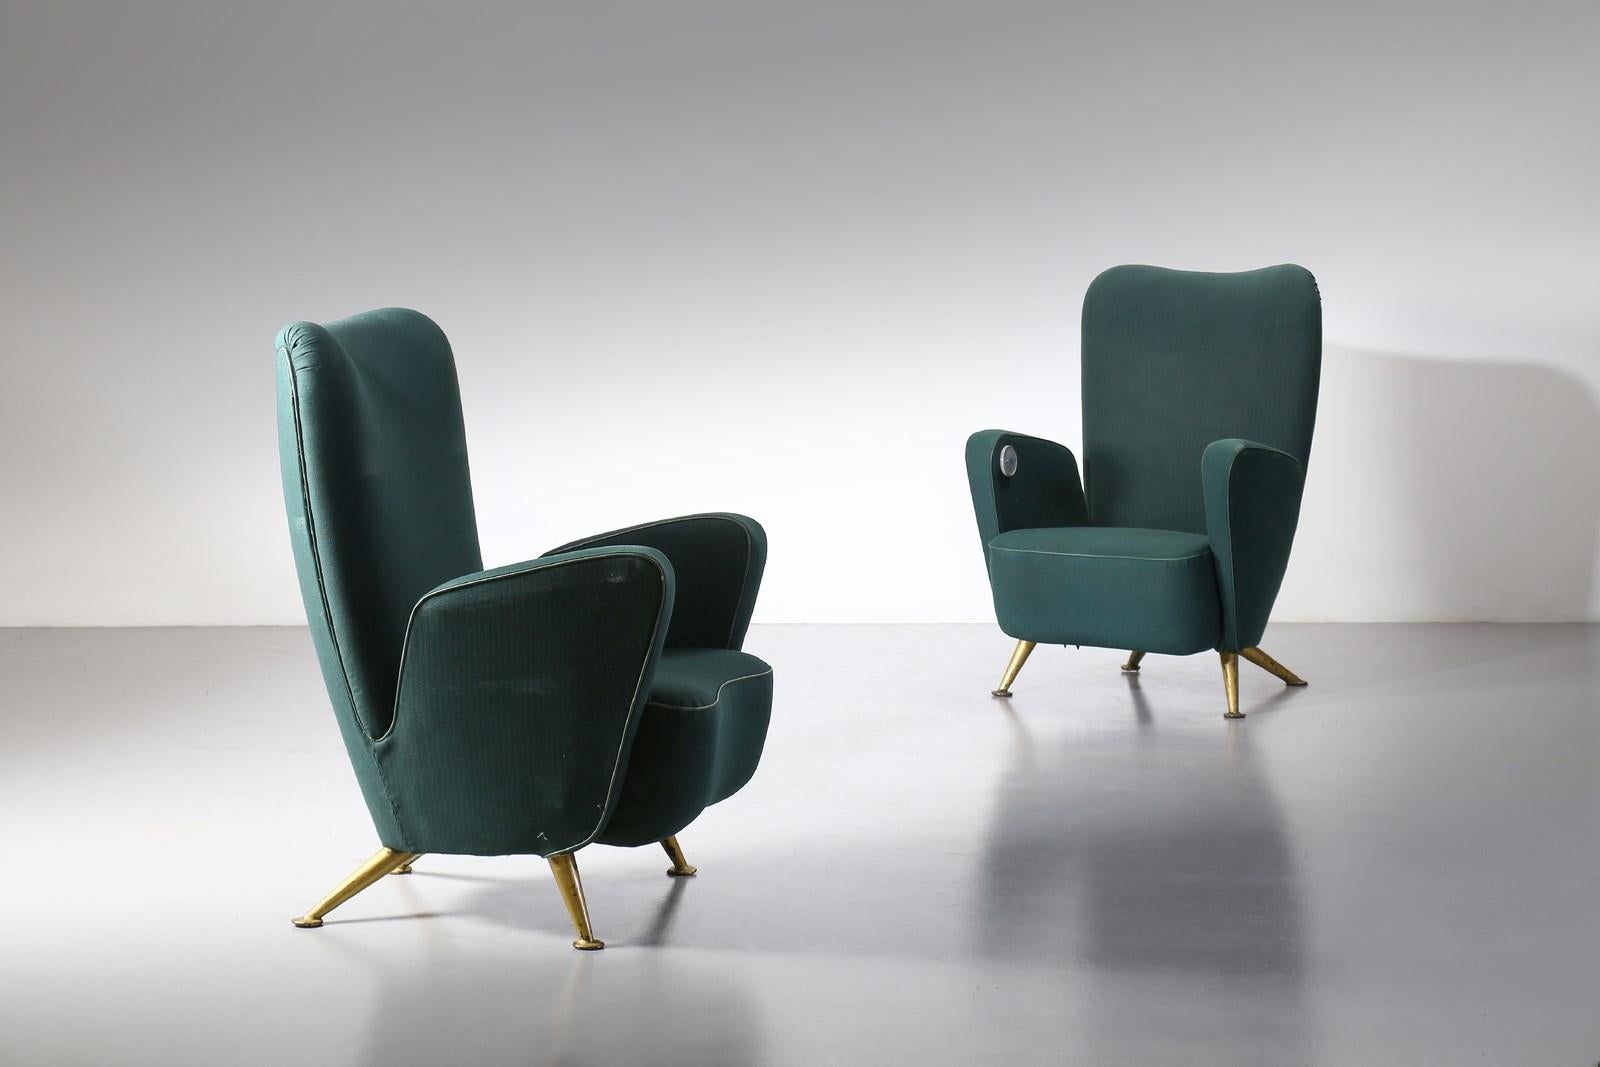 Set of Two Armchairs by Gio Ponti and Giulio Minoletti for the Settebello Train For Sale 5